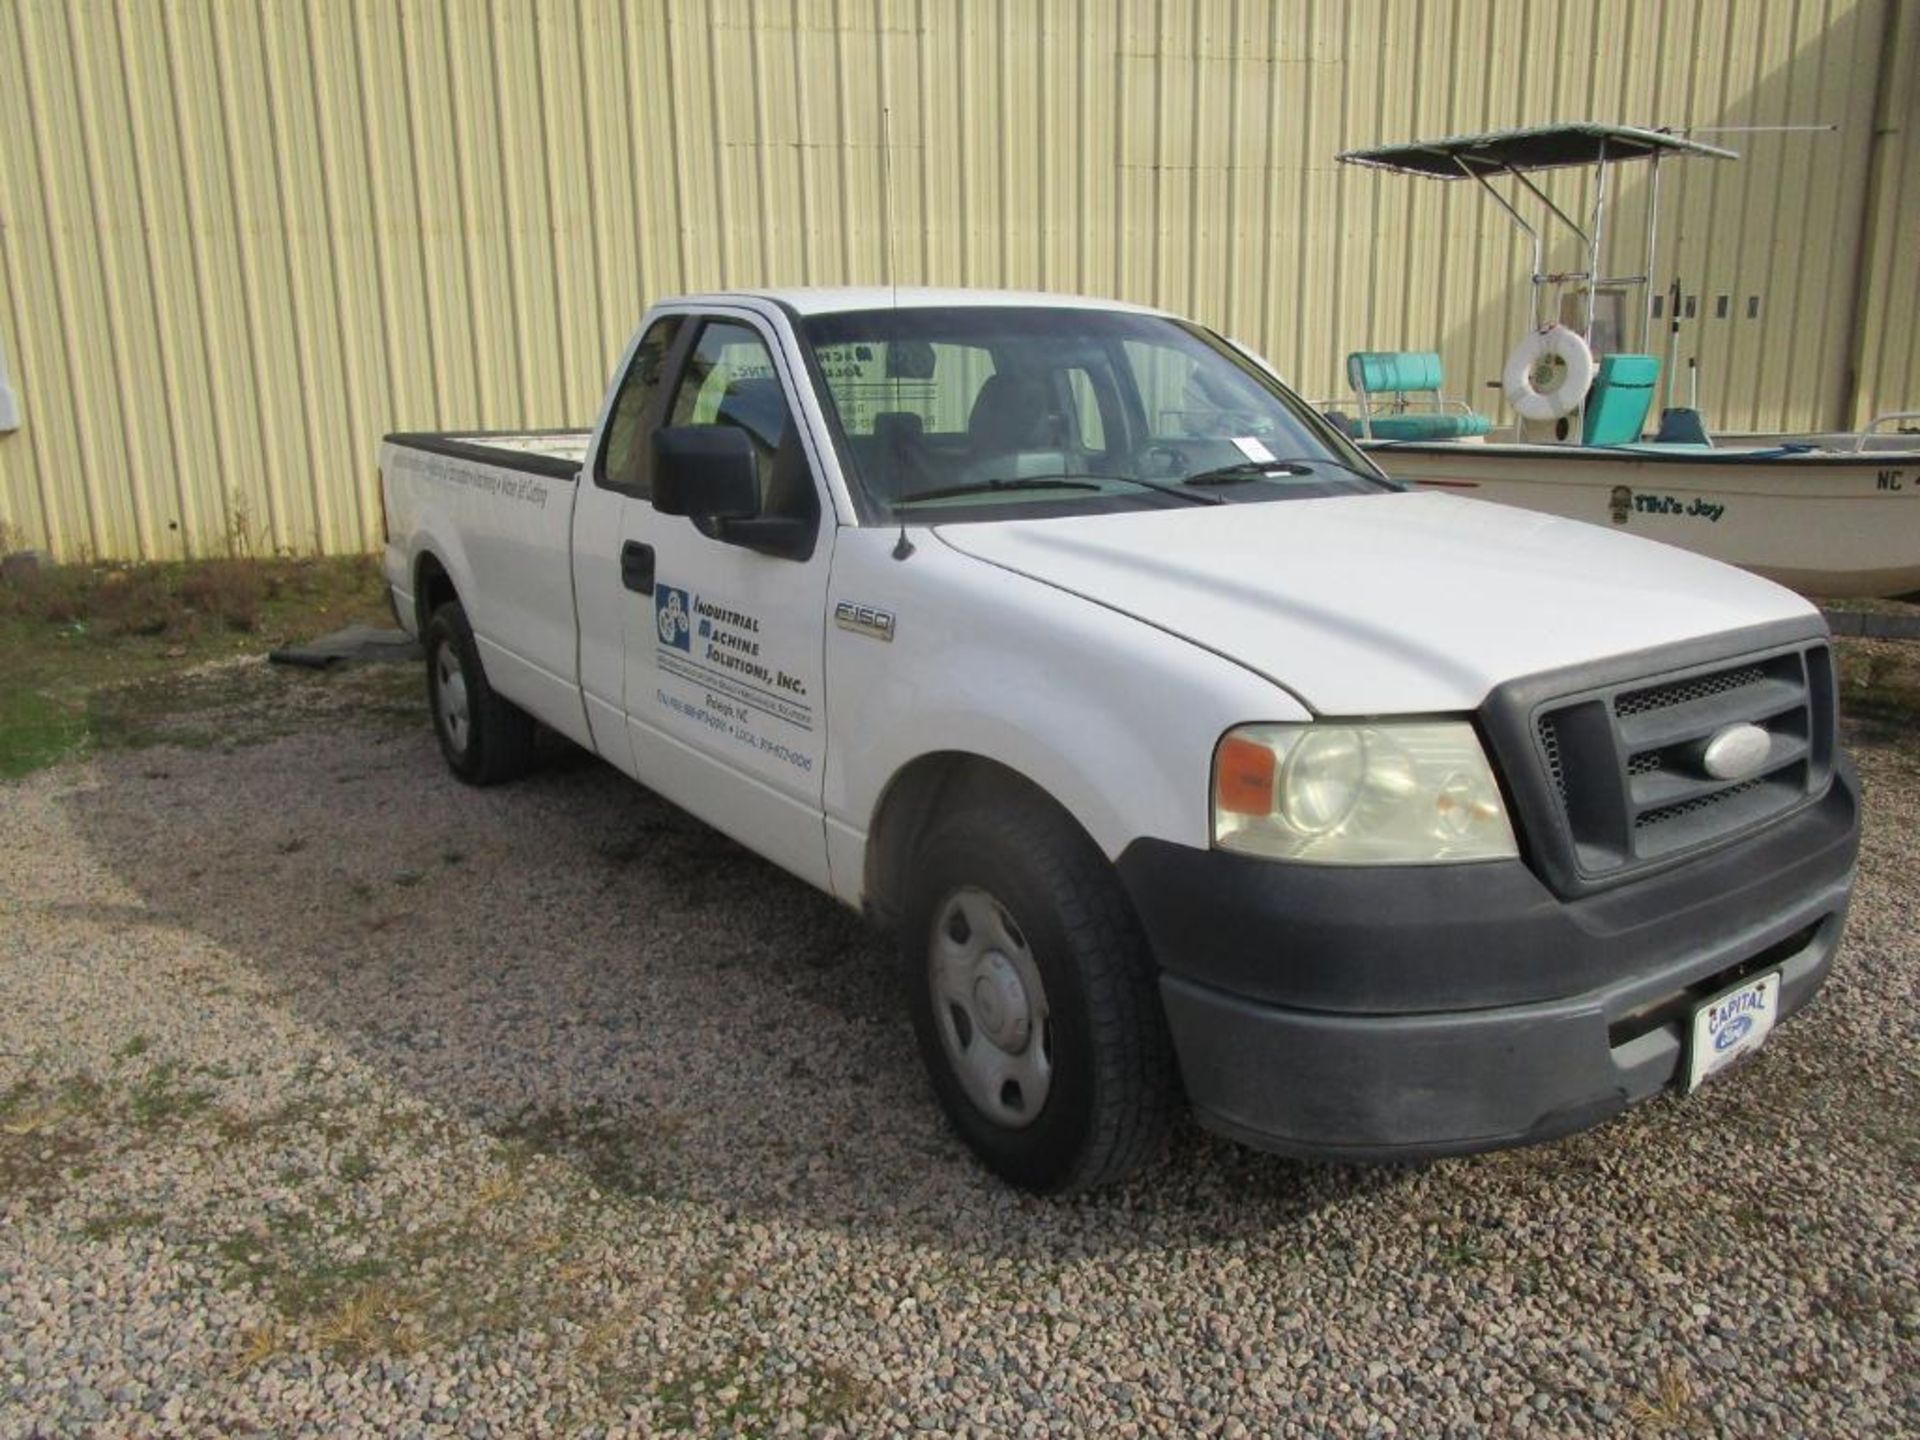 2007 Ford F150XL Extended Cab Pickup Truck - Image 2 of 7